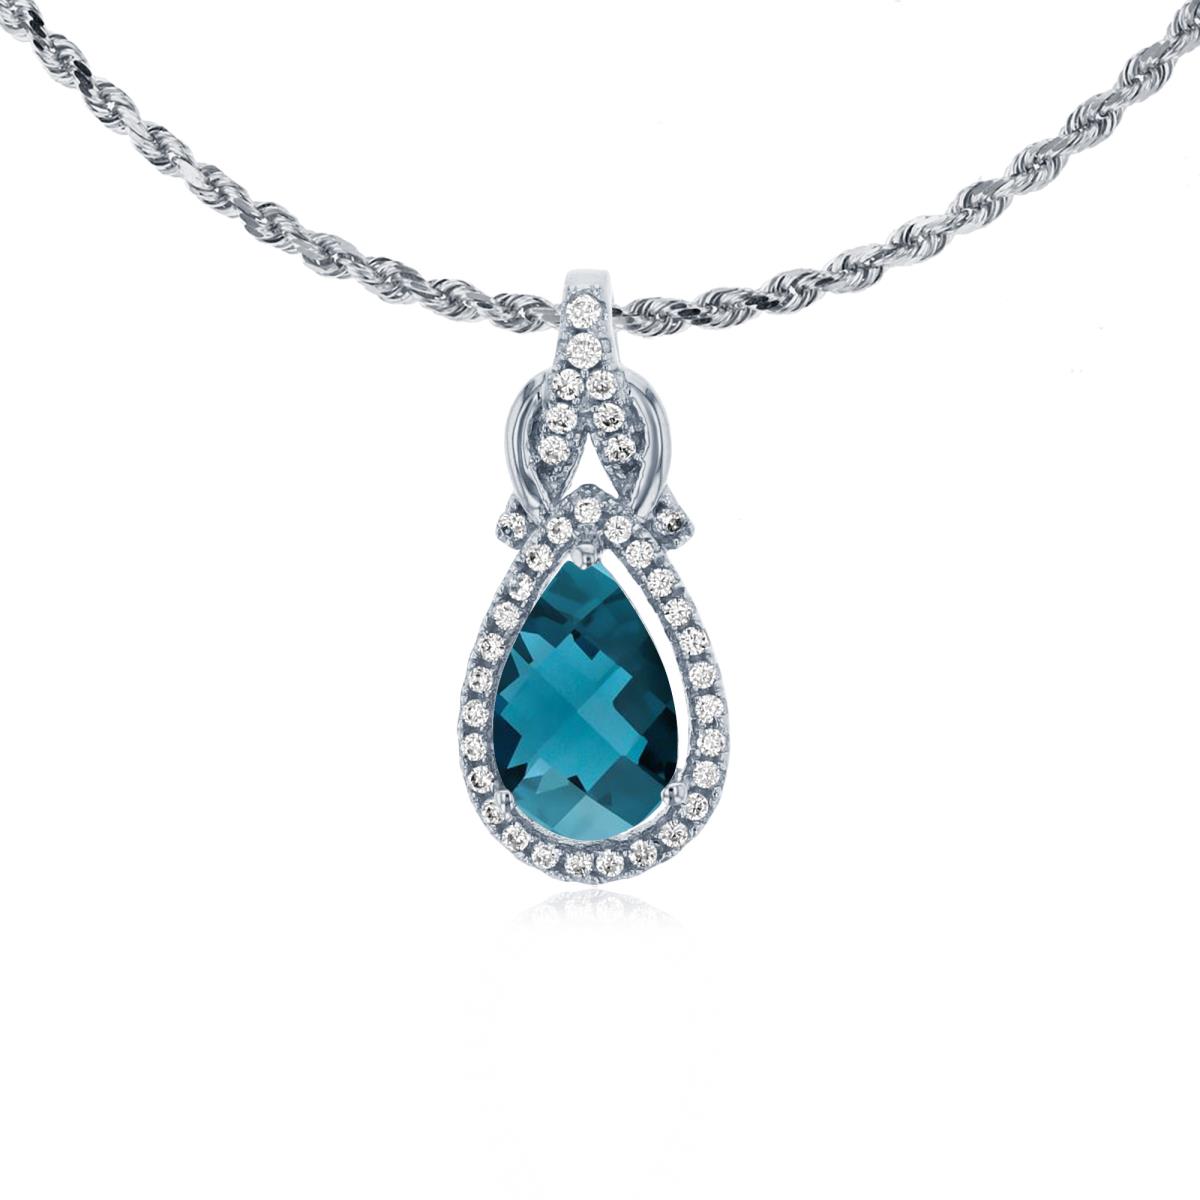 10K White Gold 8x5mm Pear Cut London Blue Topaz & 0.11 CTTW Rnd Diamond Knot 18" Rope Chain Necklace